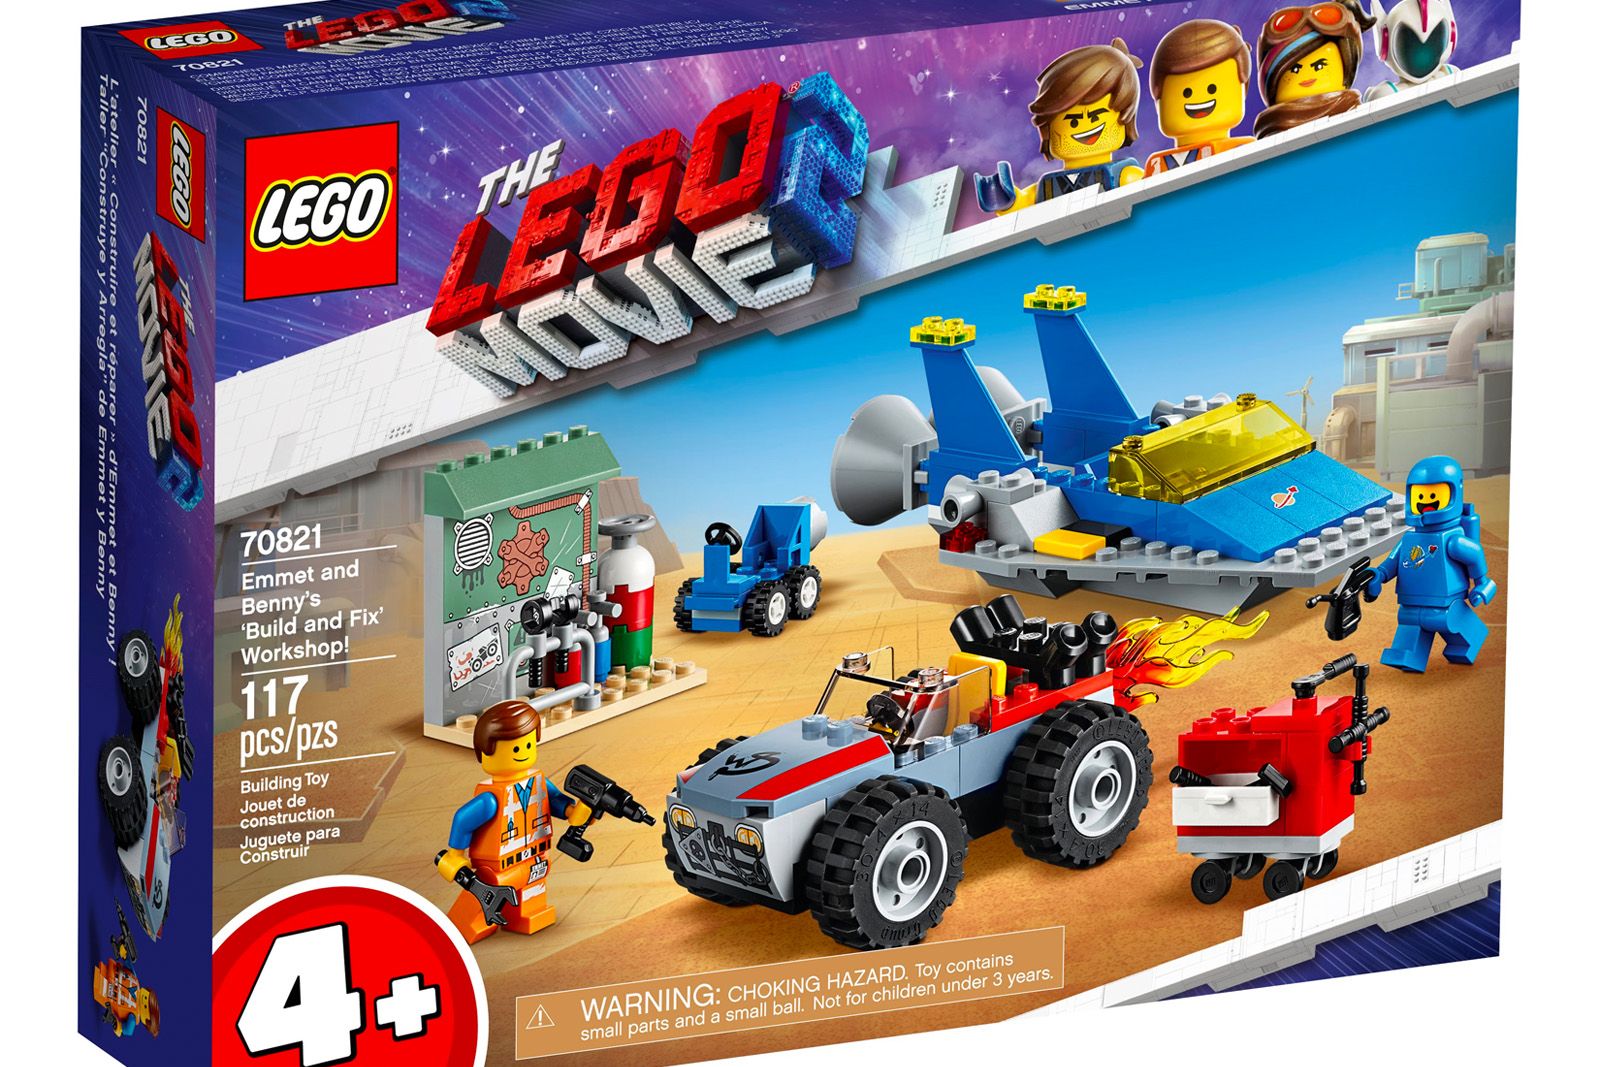 21 Lego Sets From The Lego Movie 2 The Second Part - Every Set Covered image 1